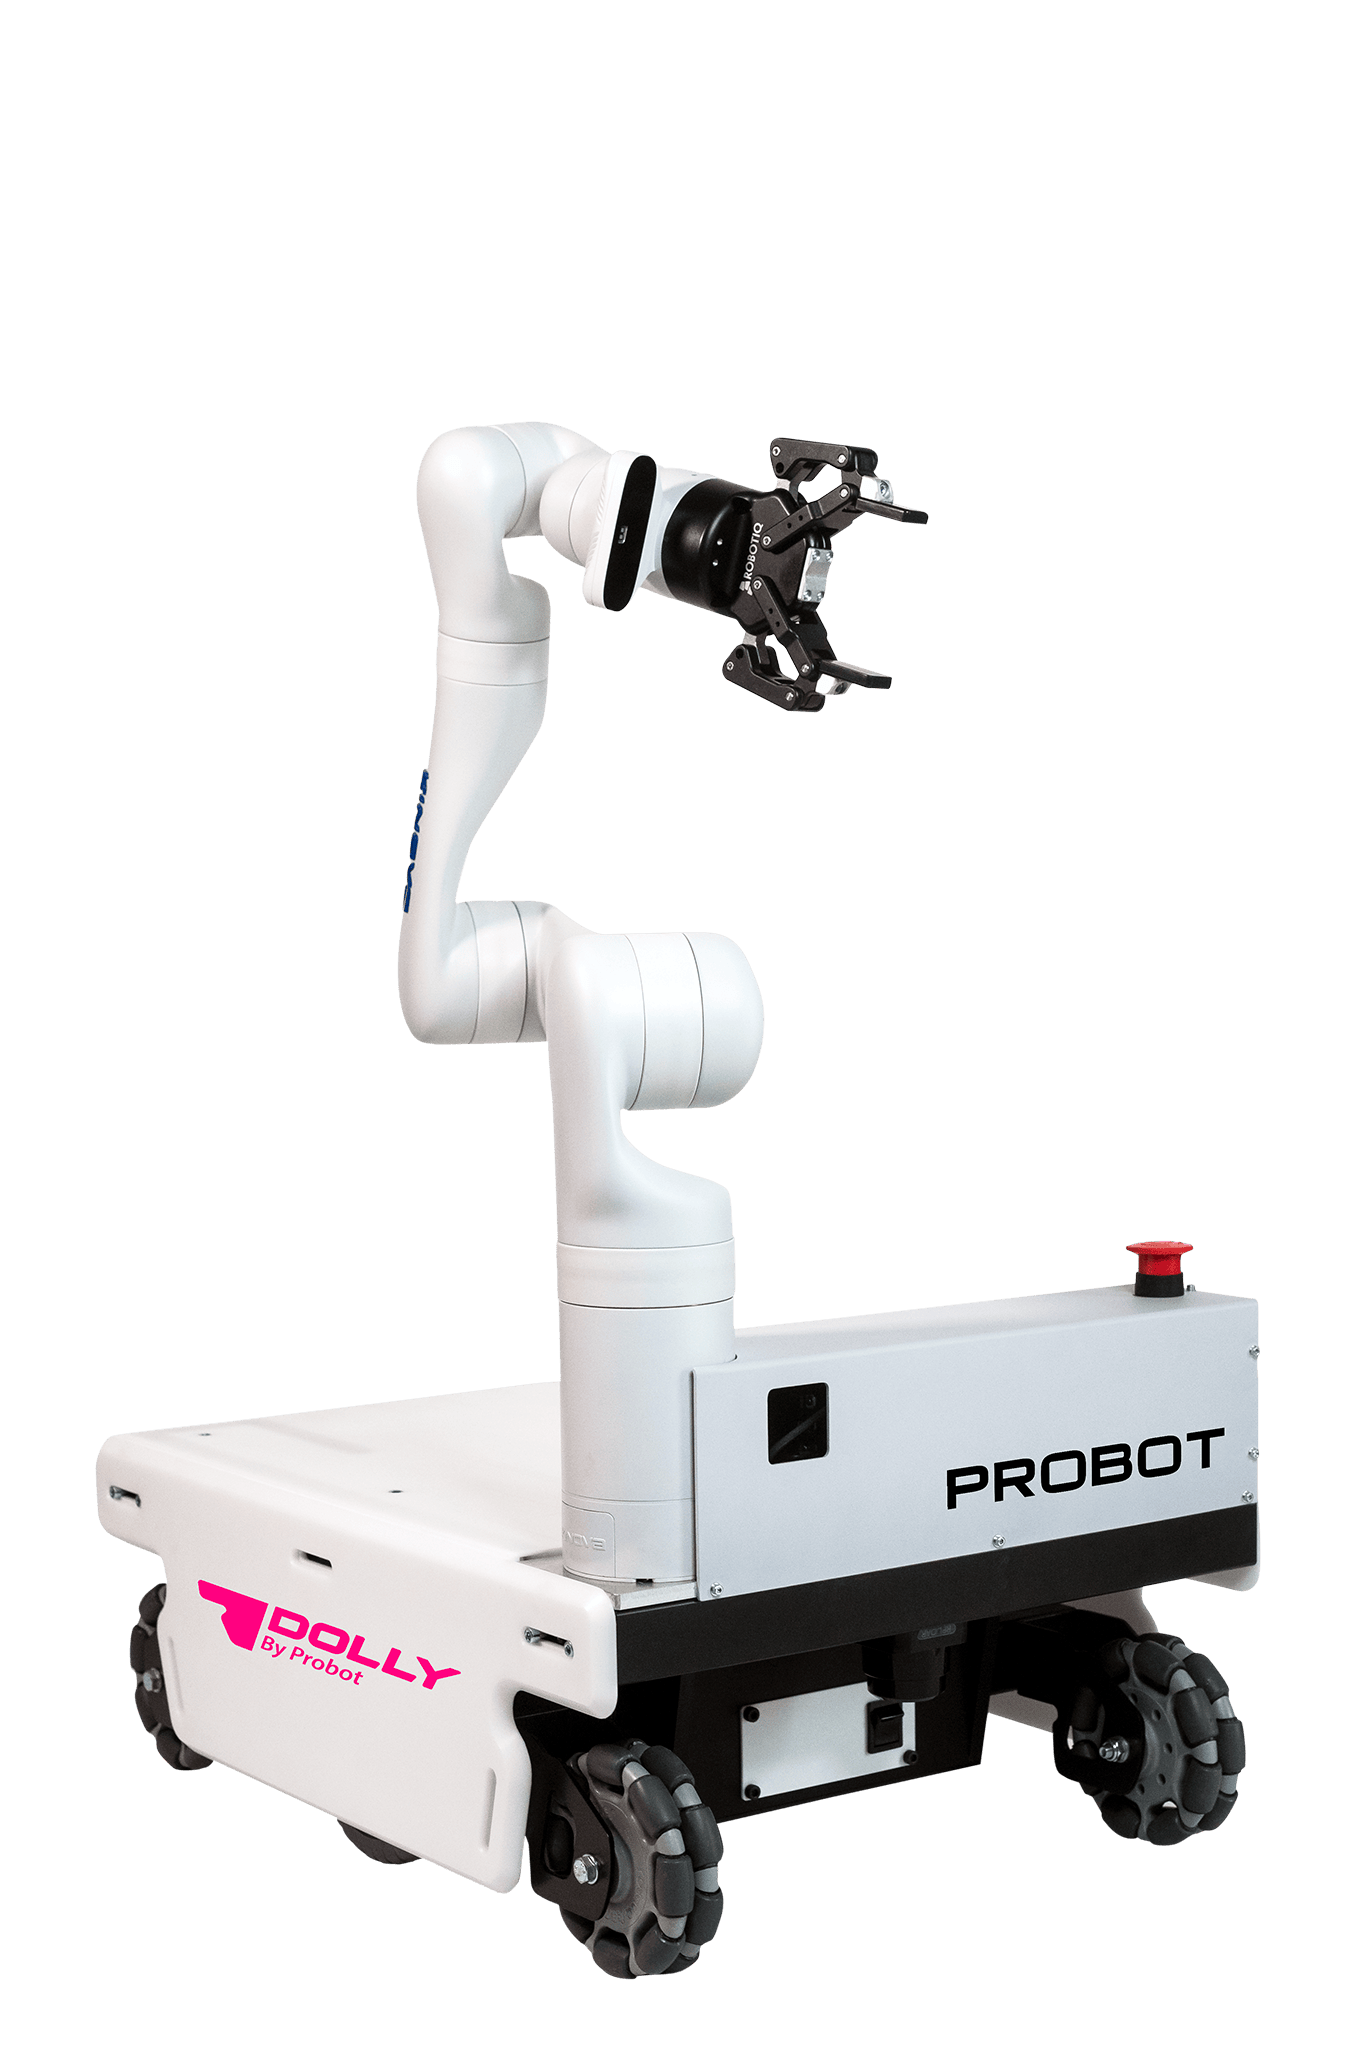 A white mobile robot with a robotic arm. The robot is marked Probot Oy and Dolly by Probot.